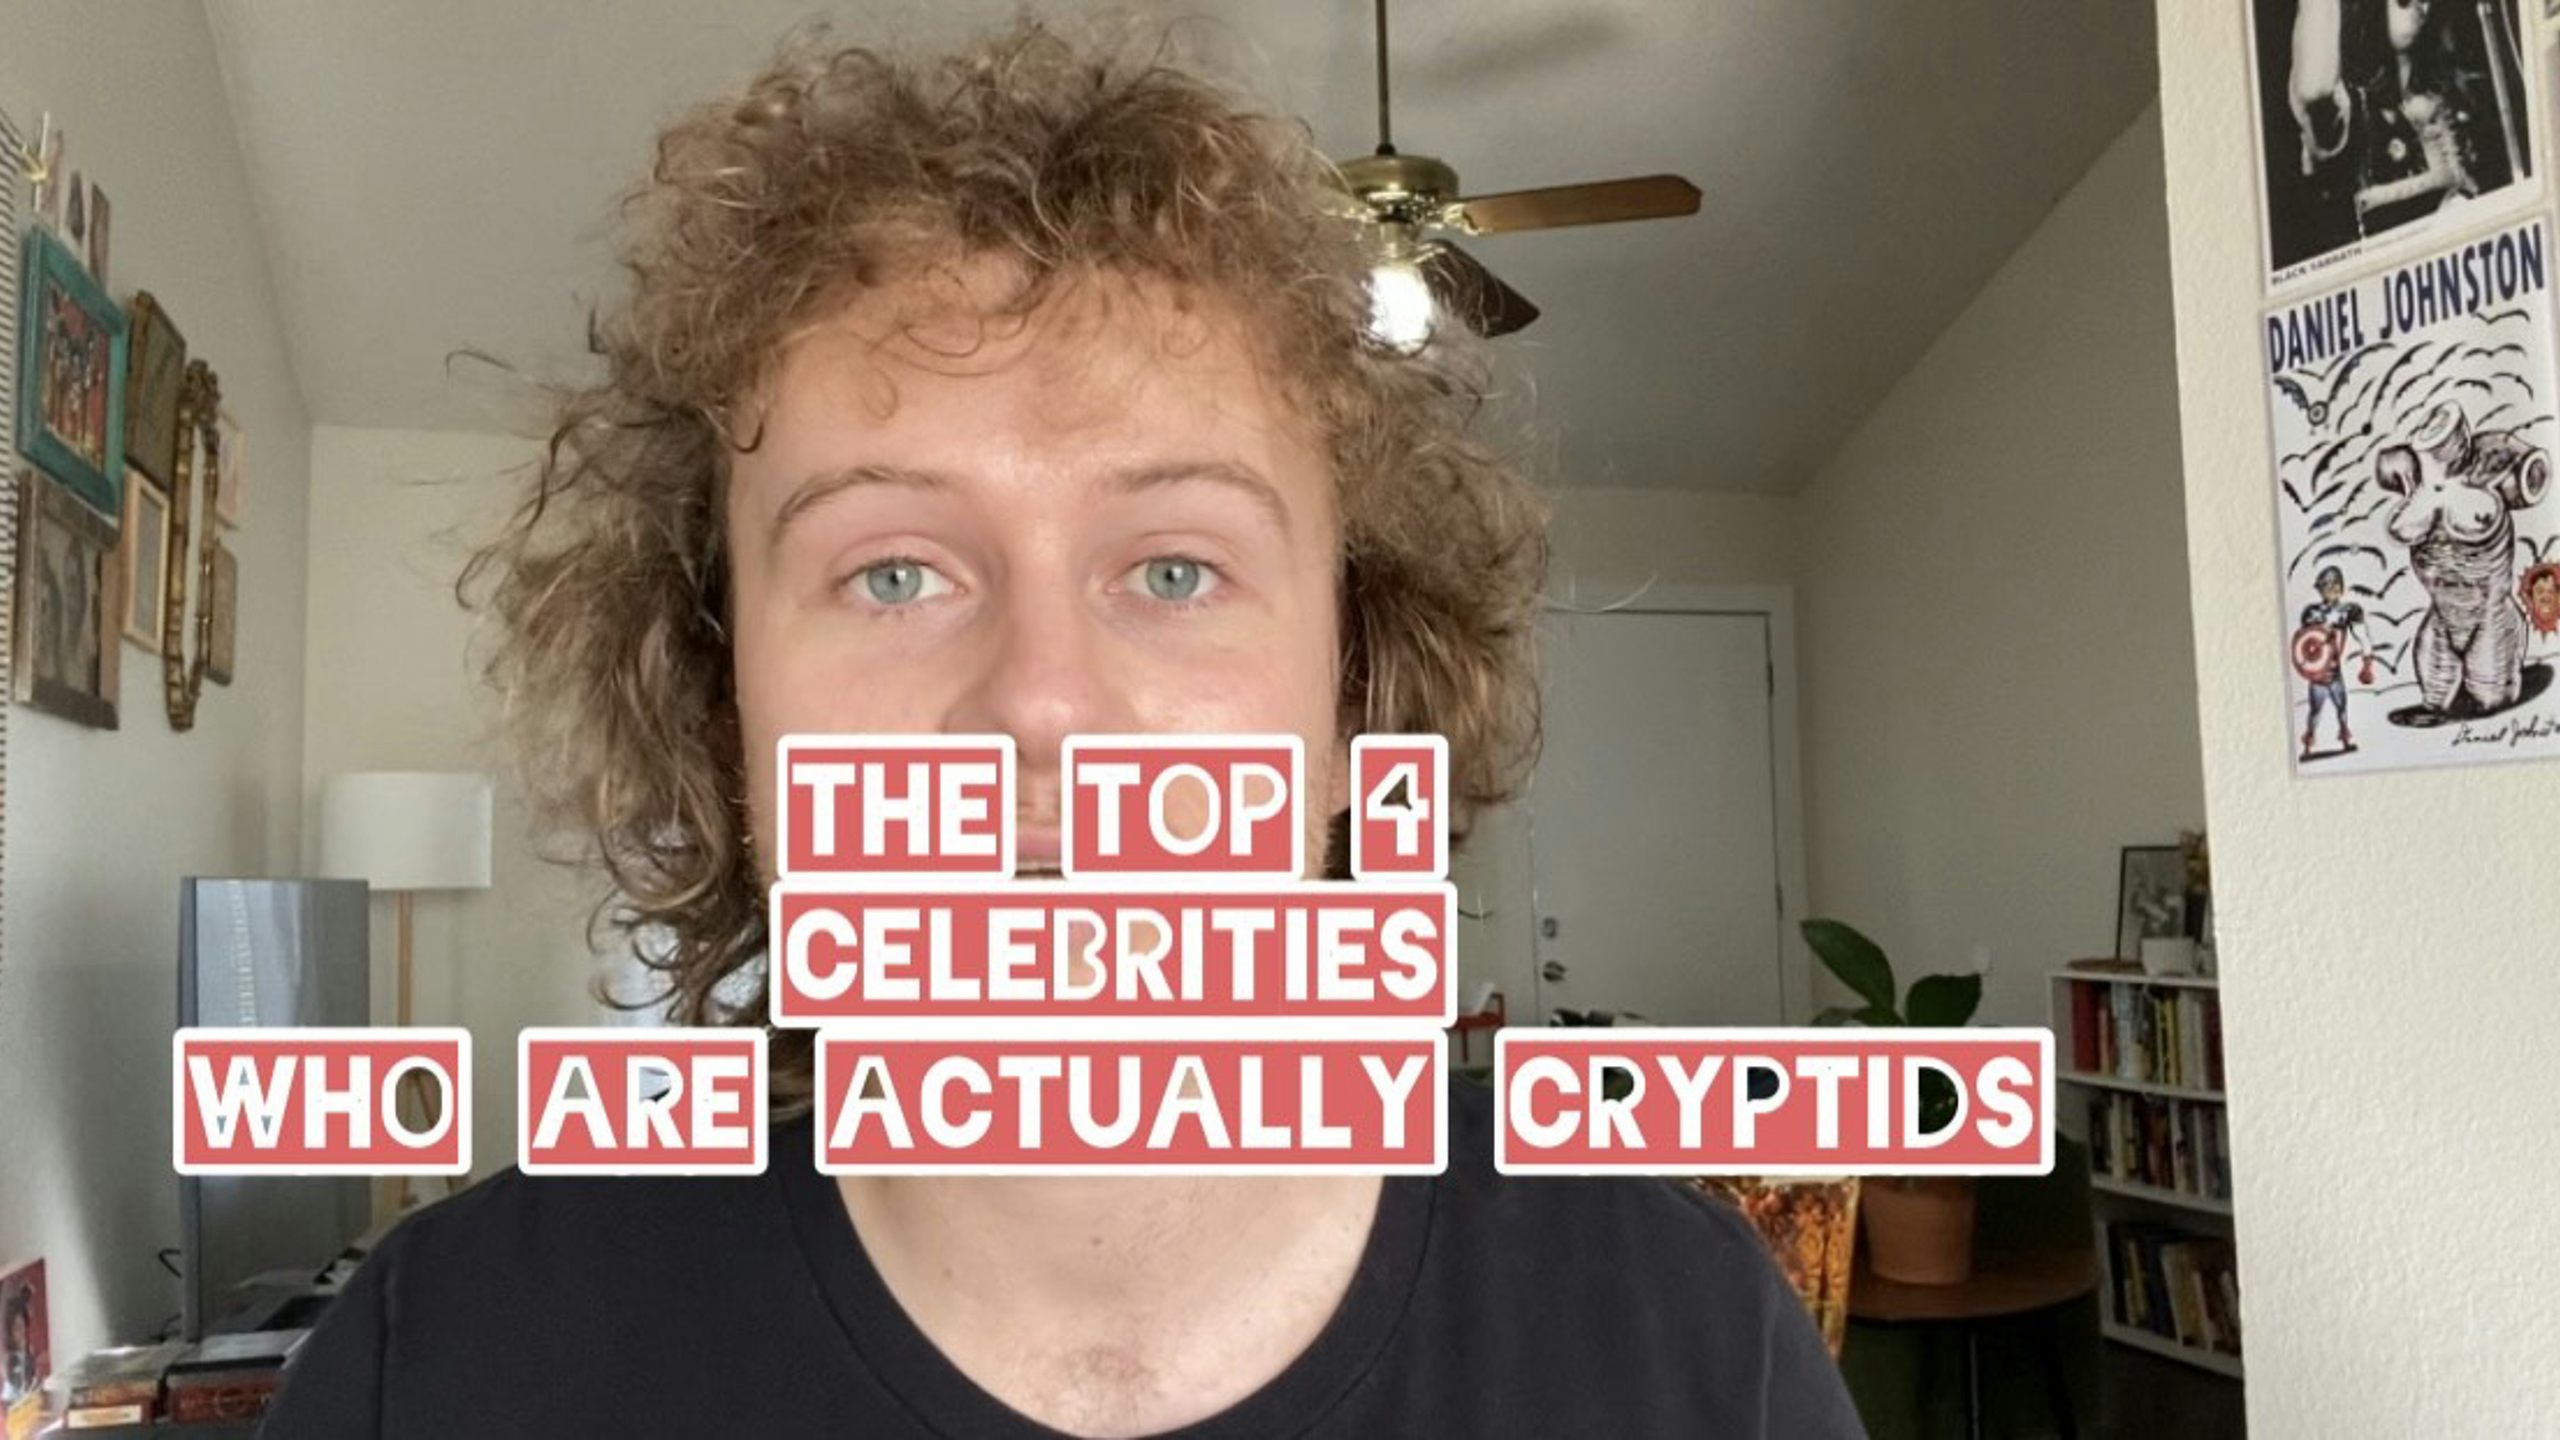 Top 4 Celebrities Who Are Actually Cryptids